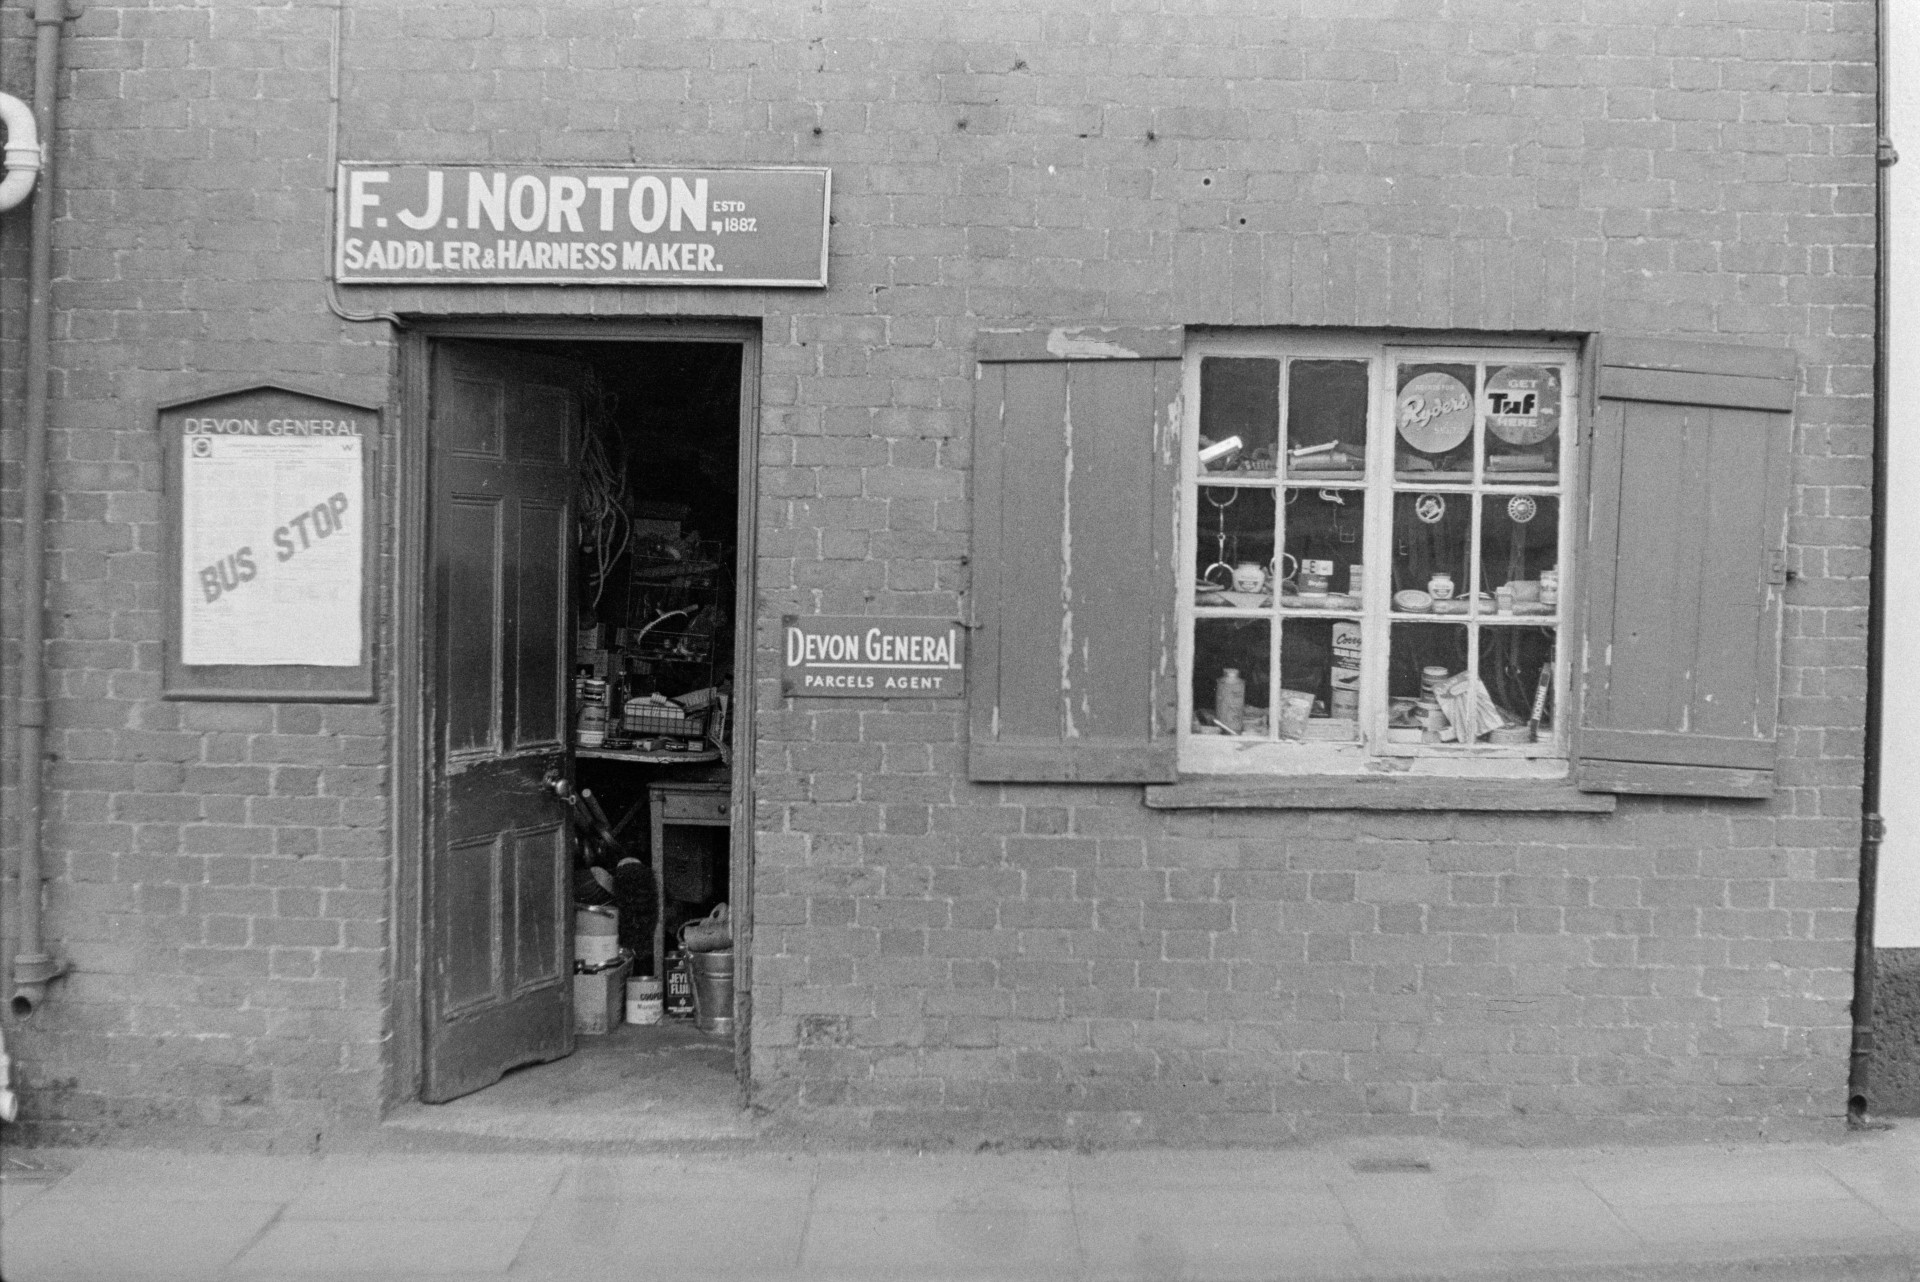 The exterior of F J Norton, Saddler and Harness maker, at Copplestone. The window has shutters.